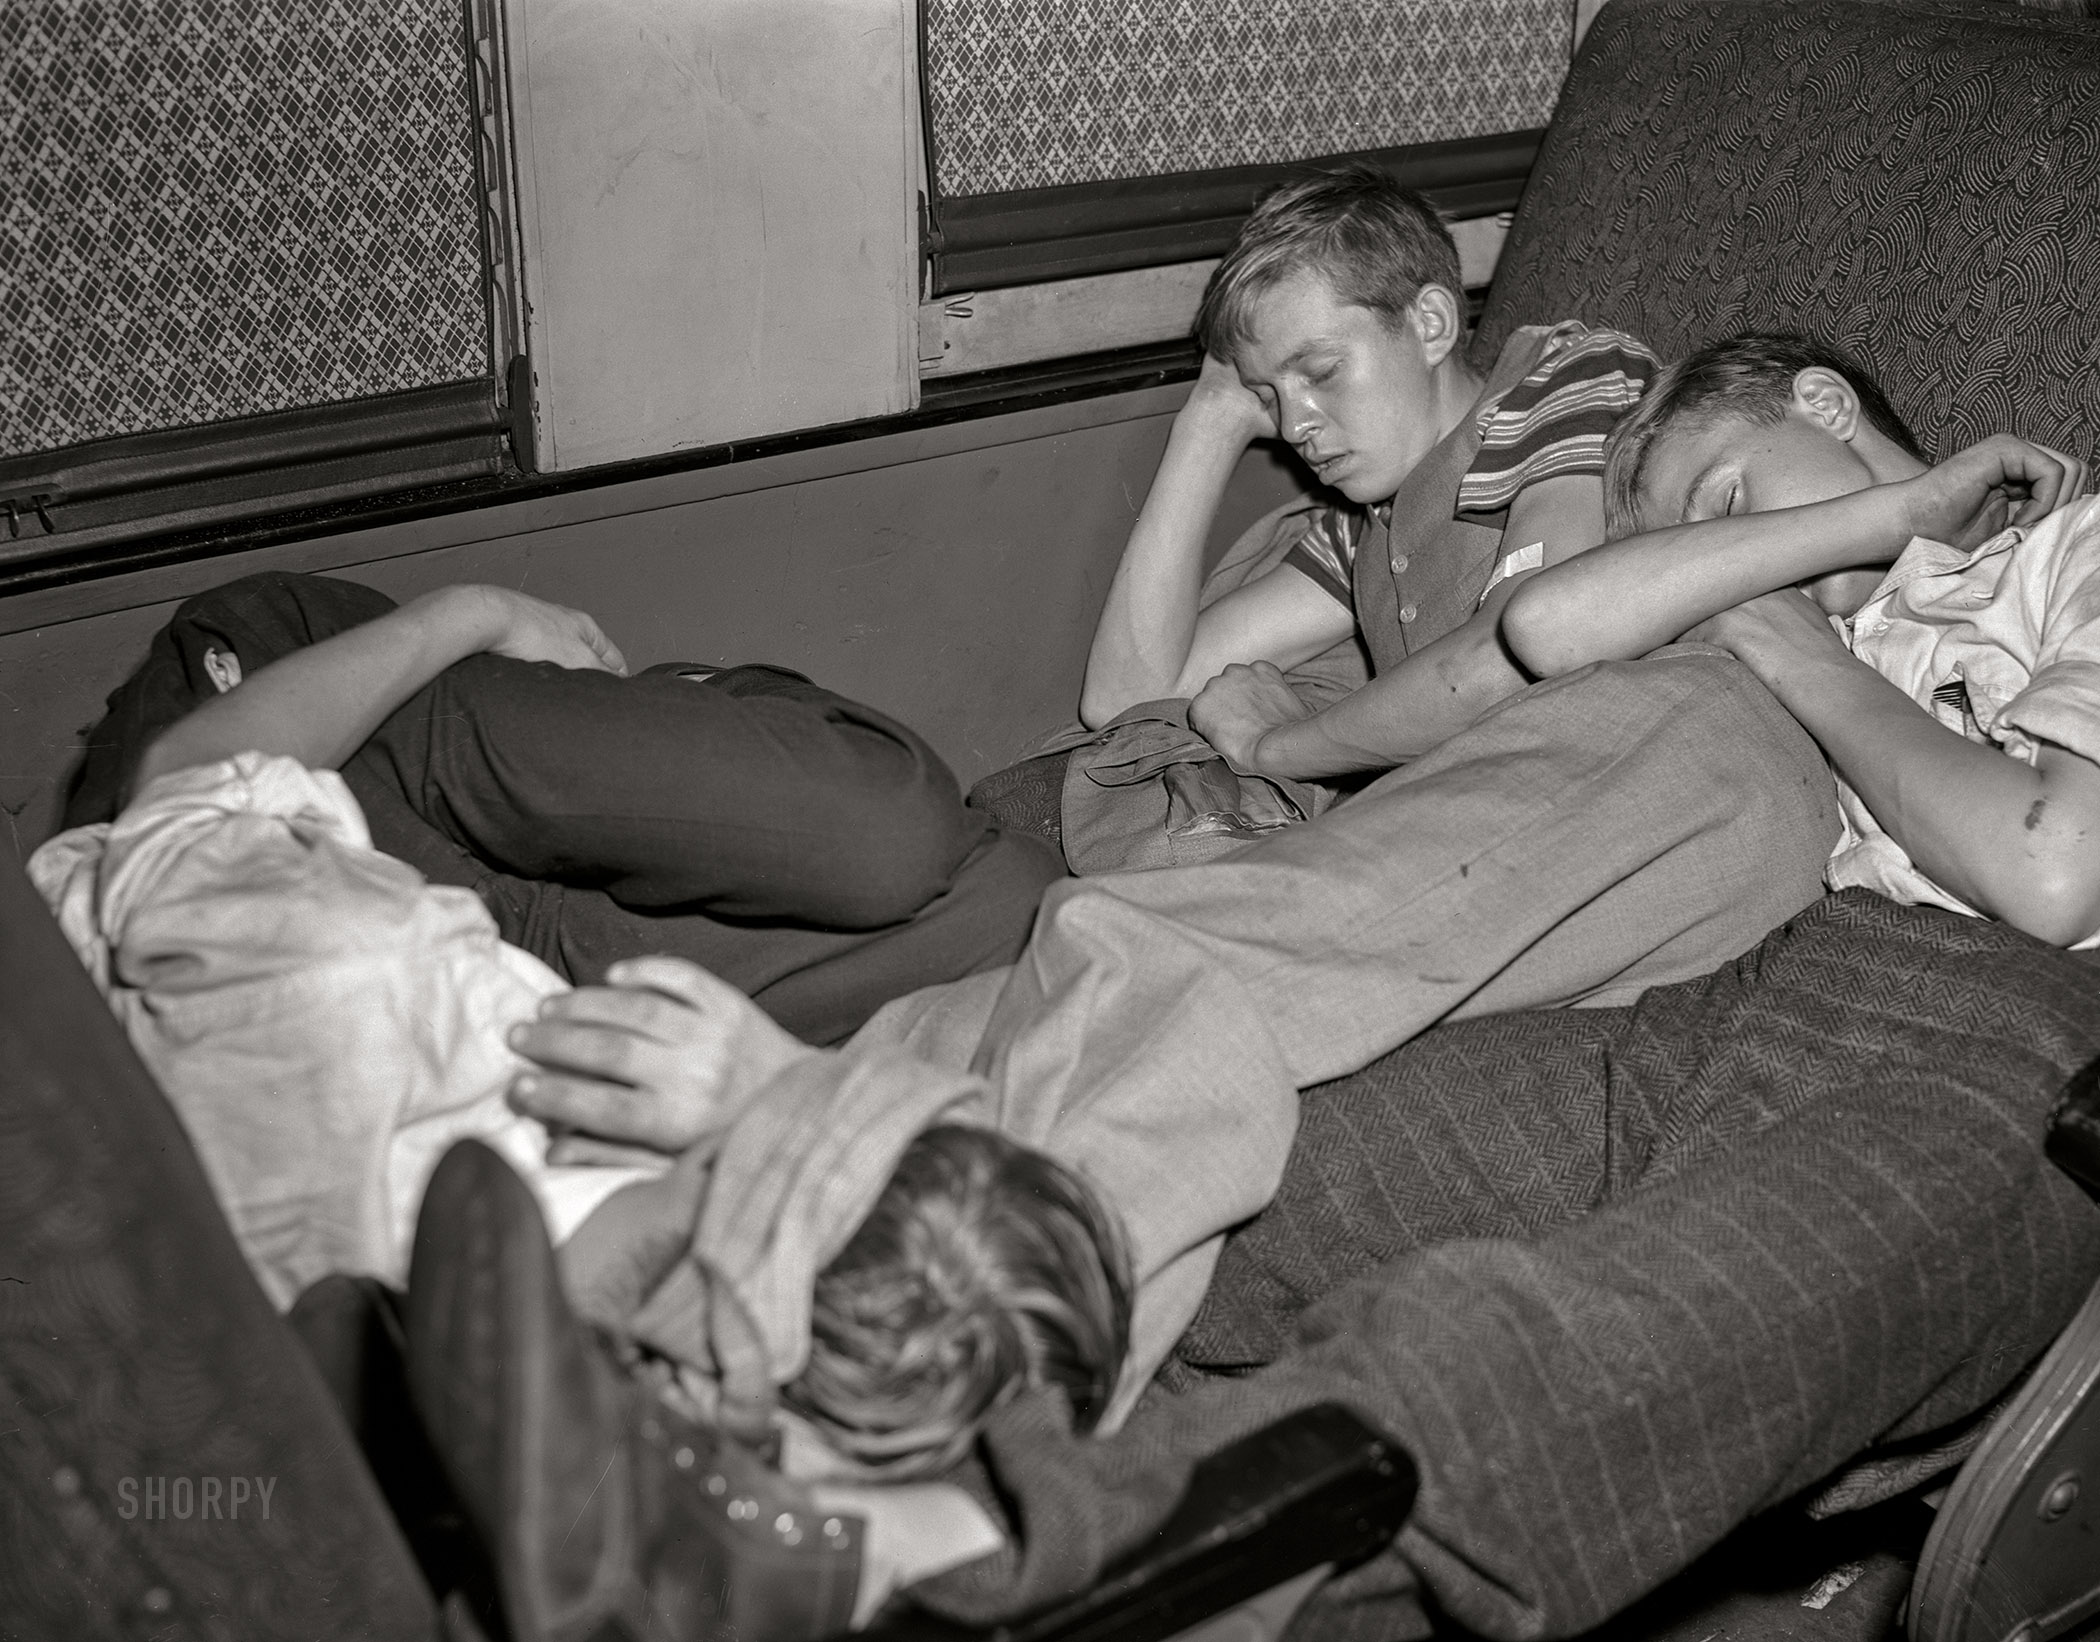 September 1942. "Boys sleeping as best they can on special train from Richwood, West Virginia, to upper New York state to work in the harvest." 4x5 inch acetate negative by John Collier for the Farm Security Administration. View full size.